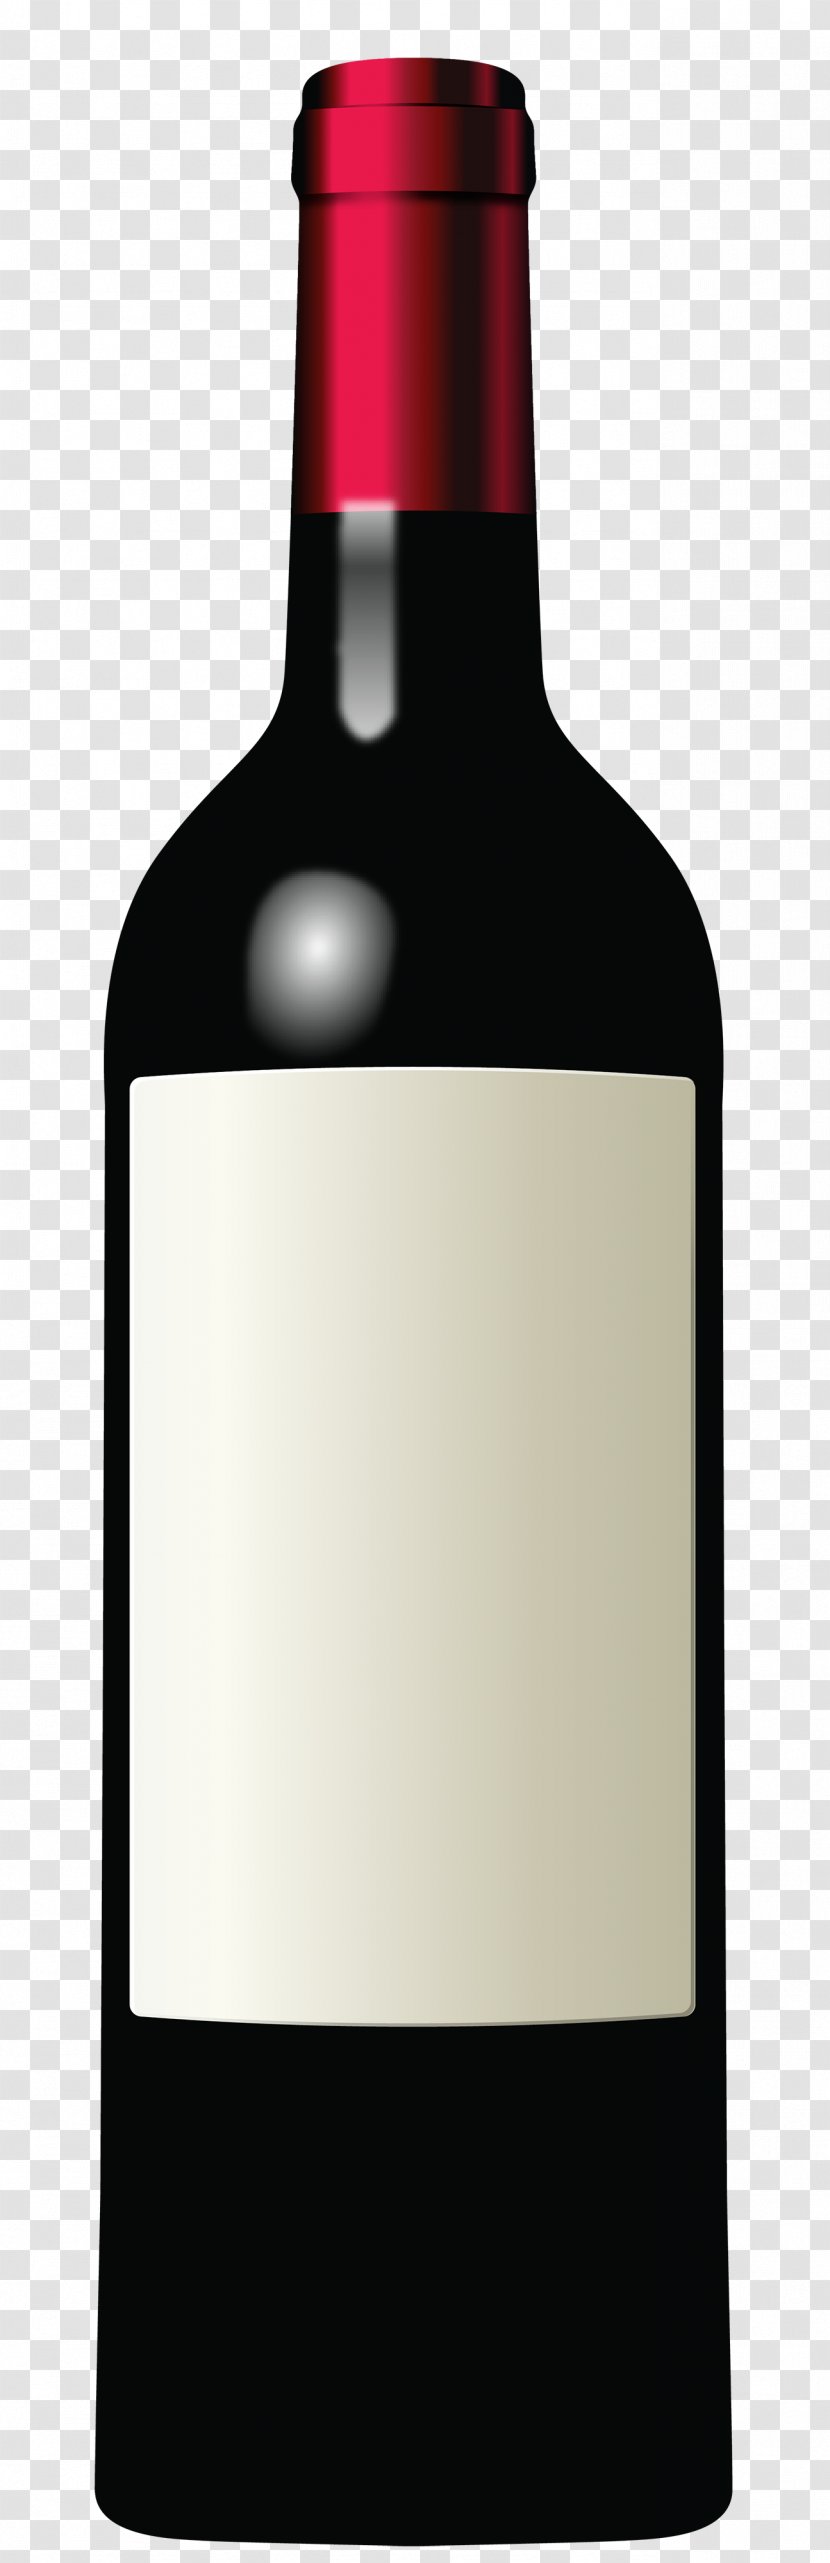 Red Wine Champagne Bottle - 7 Transparent PNG